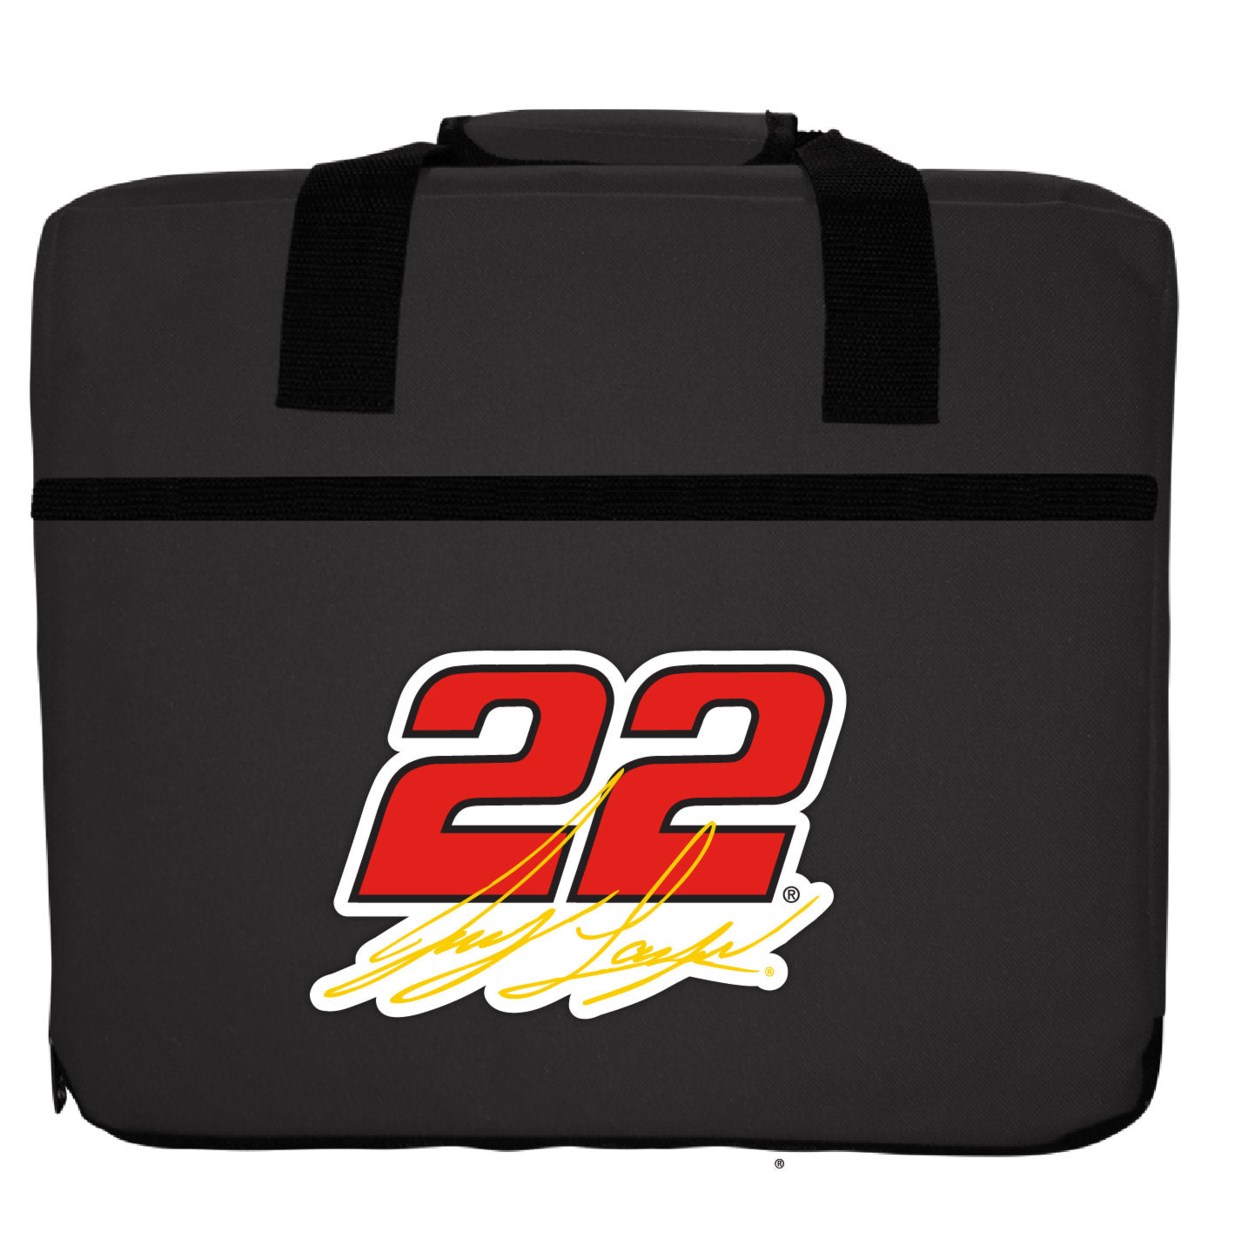 R And R Imports Officially Licensed NASCAR Joey Logano #22 Single Sided Seat Cushion New For 2020